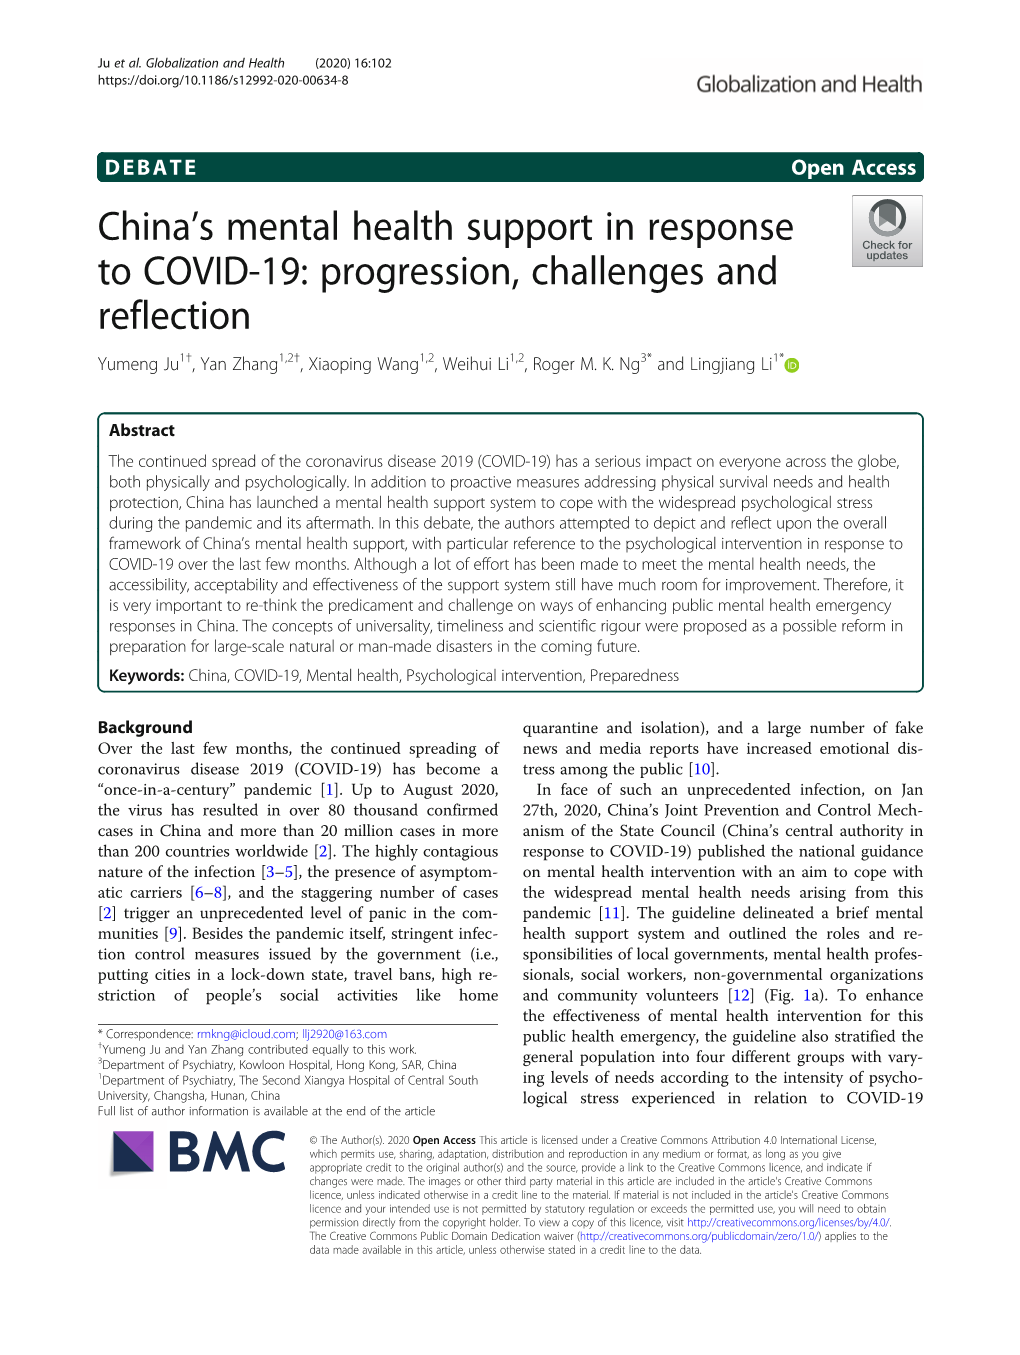 China's Mental Health Support in Response to COVID-19